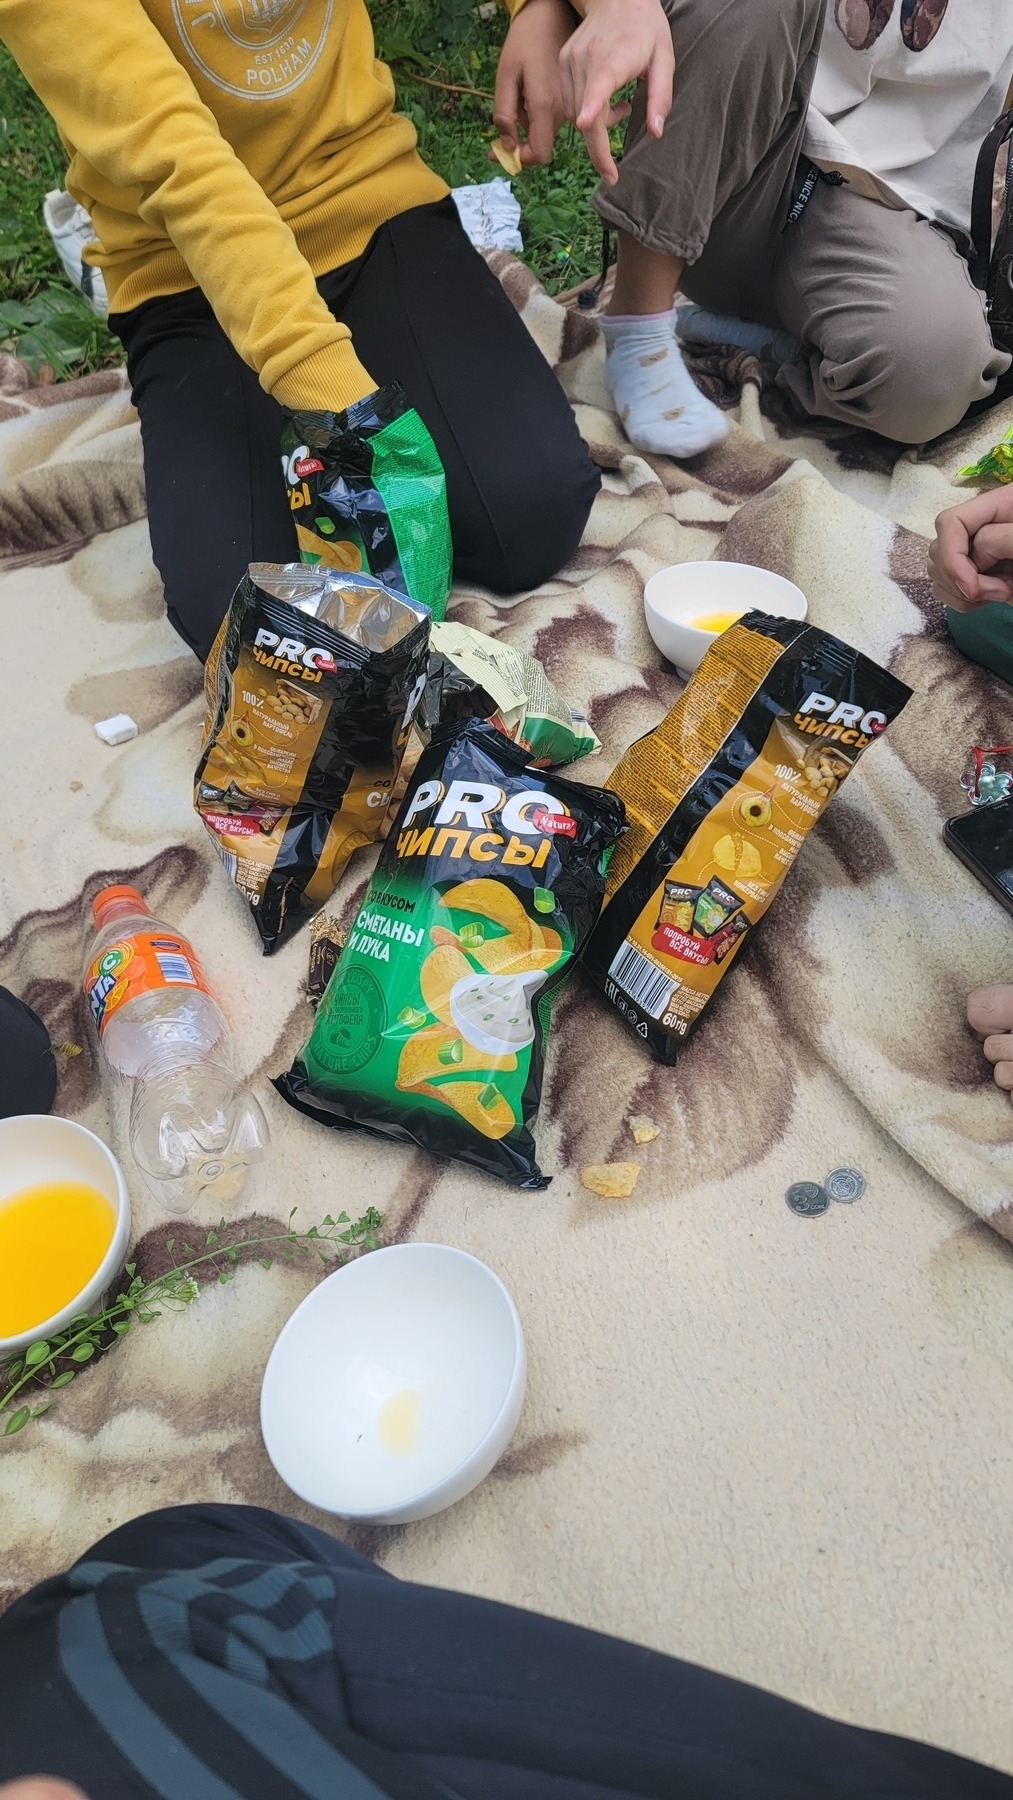 four bags of chips and two teacups for Fanta on a blanket on the ground, which 5 people are kneeling on